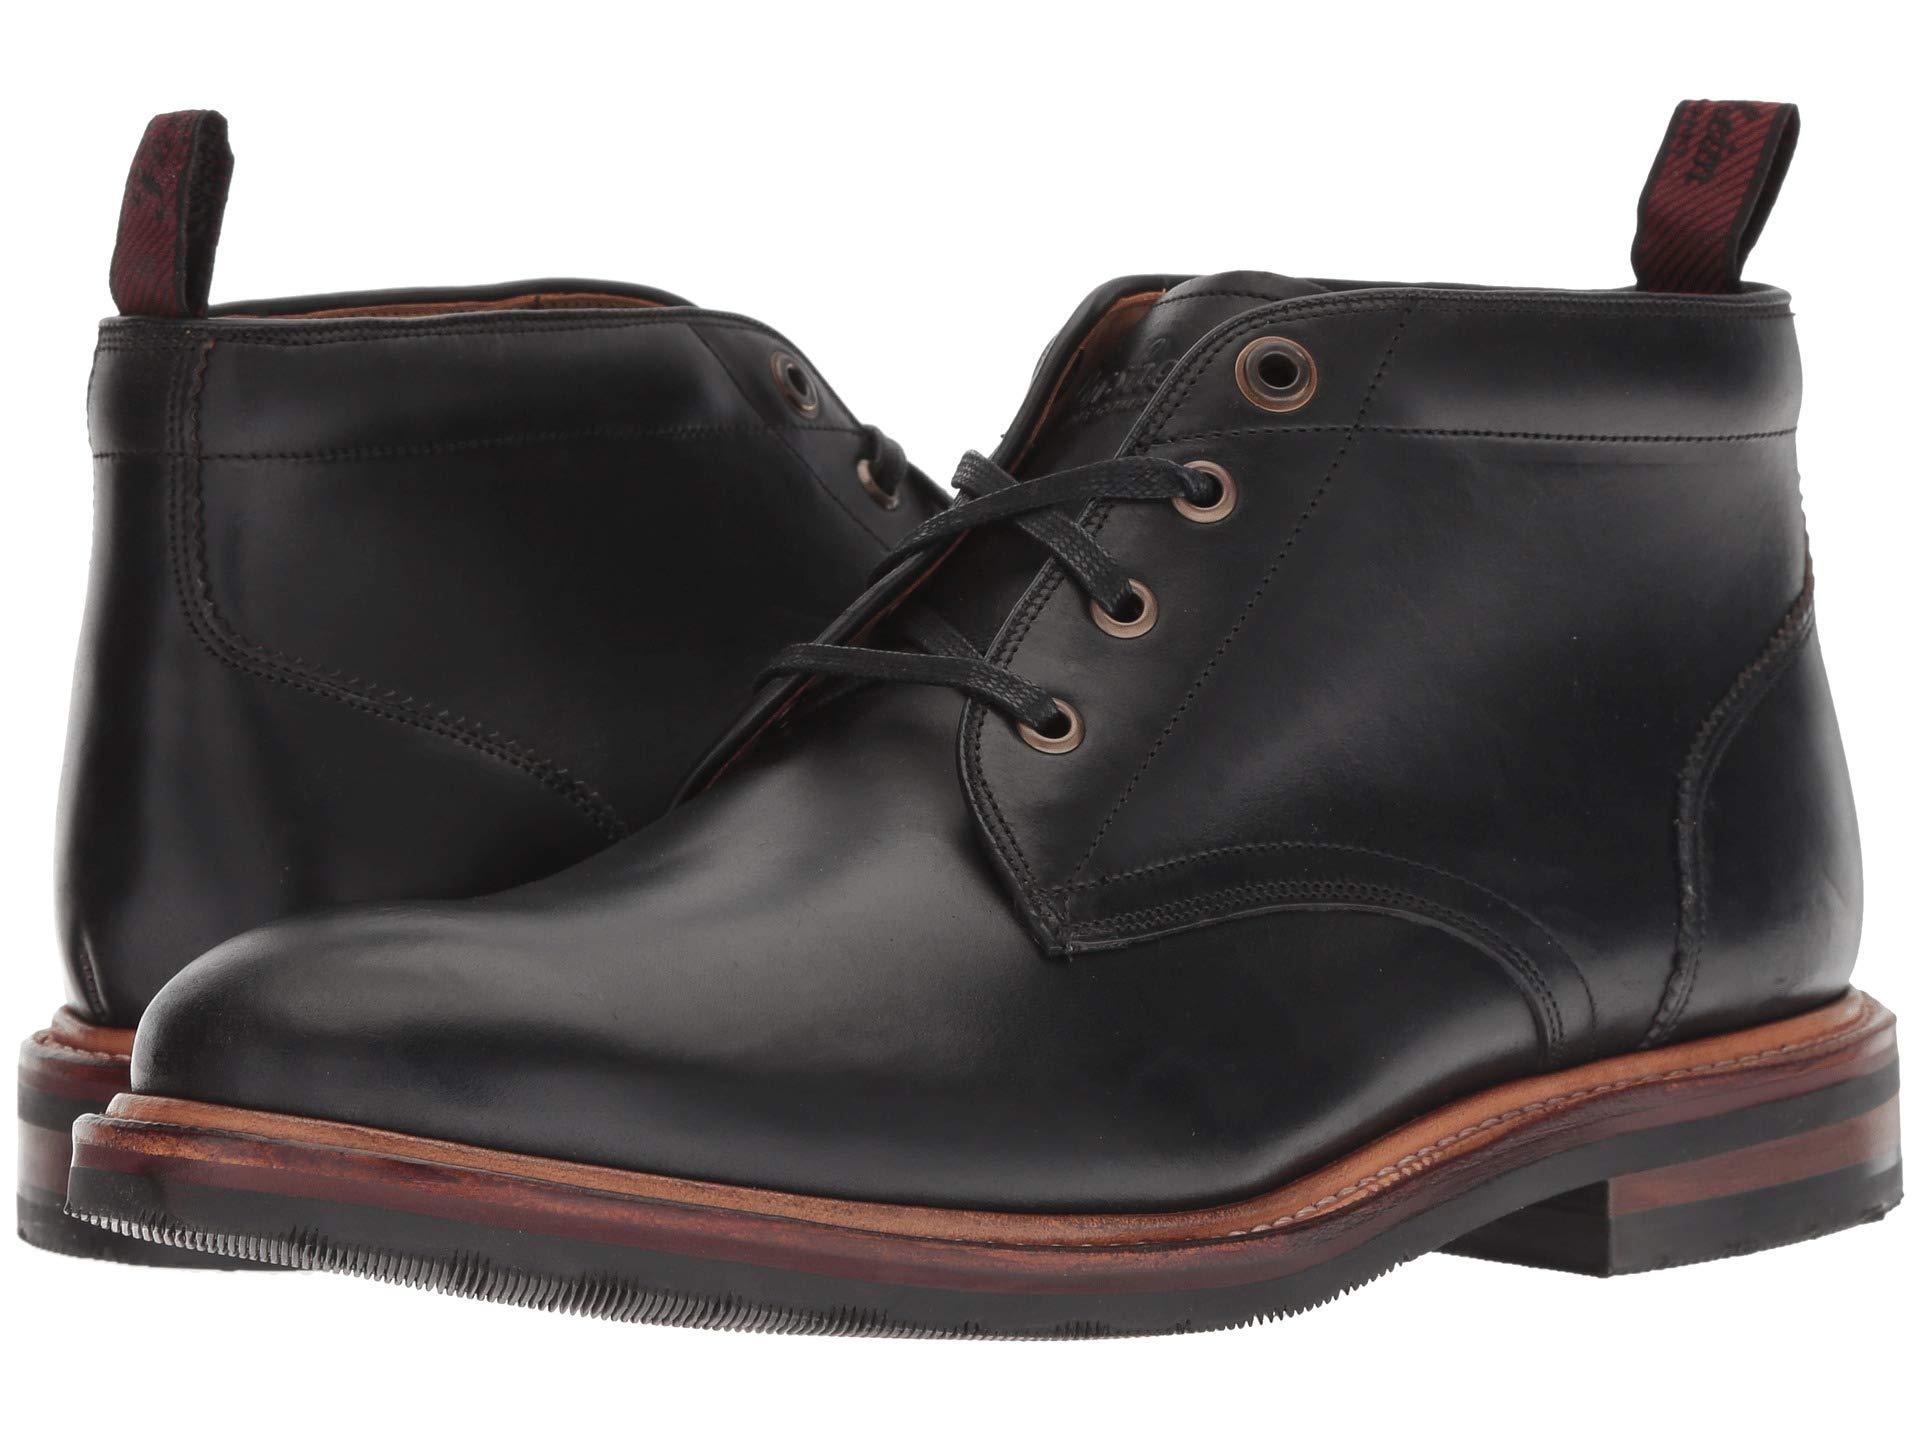 Florsheim Leather Foundry Plain Toe Chukka Boot in Black for Men - Lyst